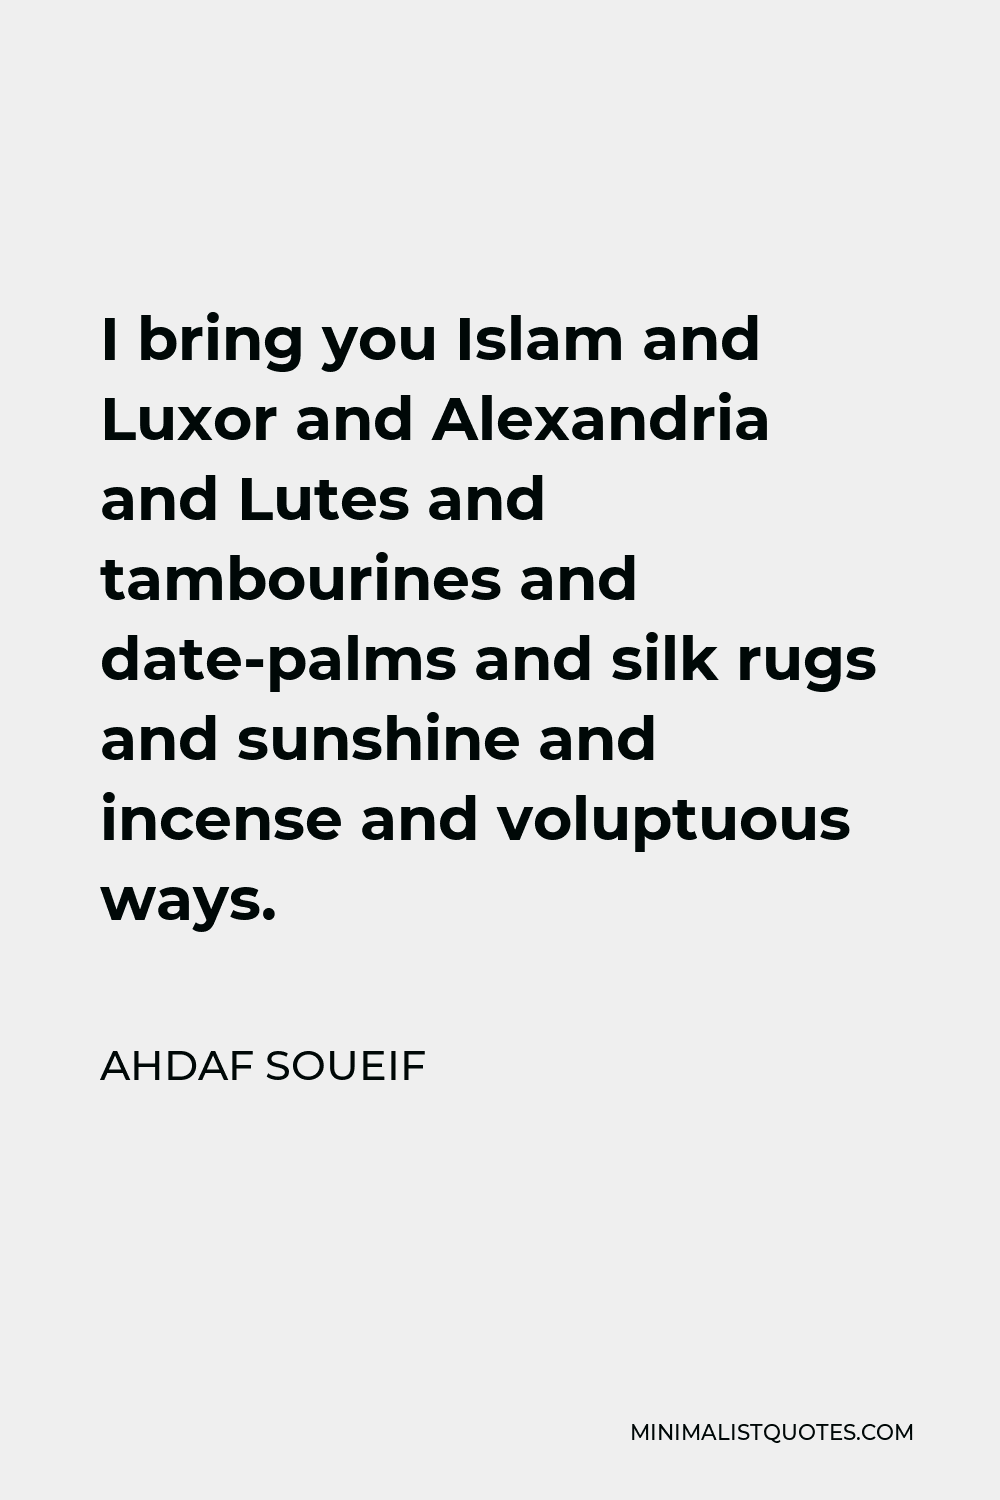 Ahdaf Soueif Quote - I bring you Islam and Luxor and Alexandria and Lutes and tambourines and date-palms and silk rugs and sunshine and incense and voluptuous ways.